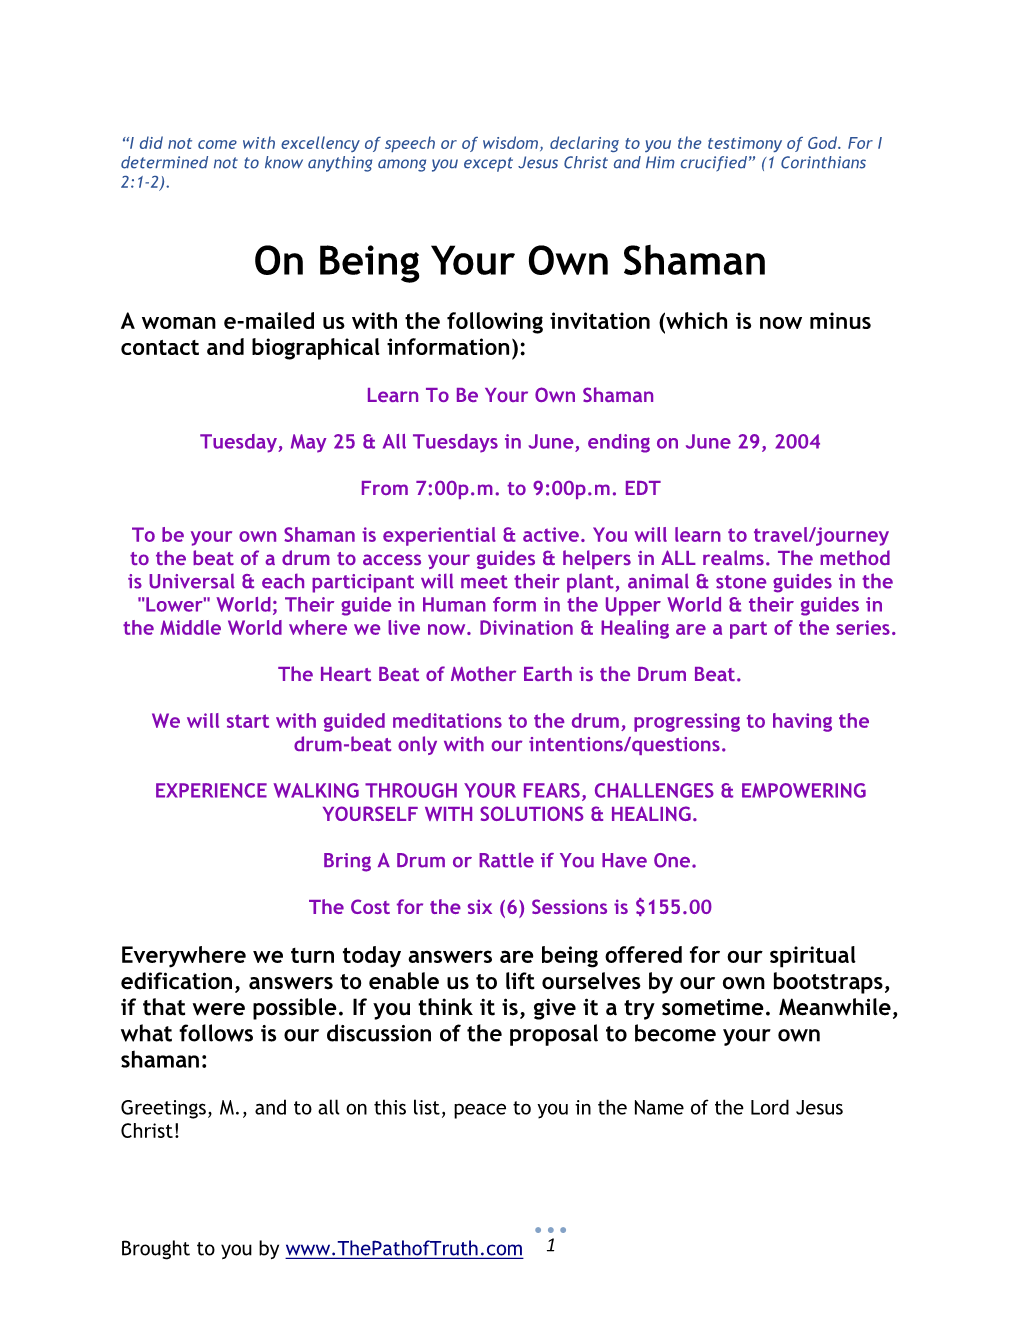 On Being Your Own Shaman